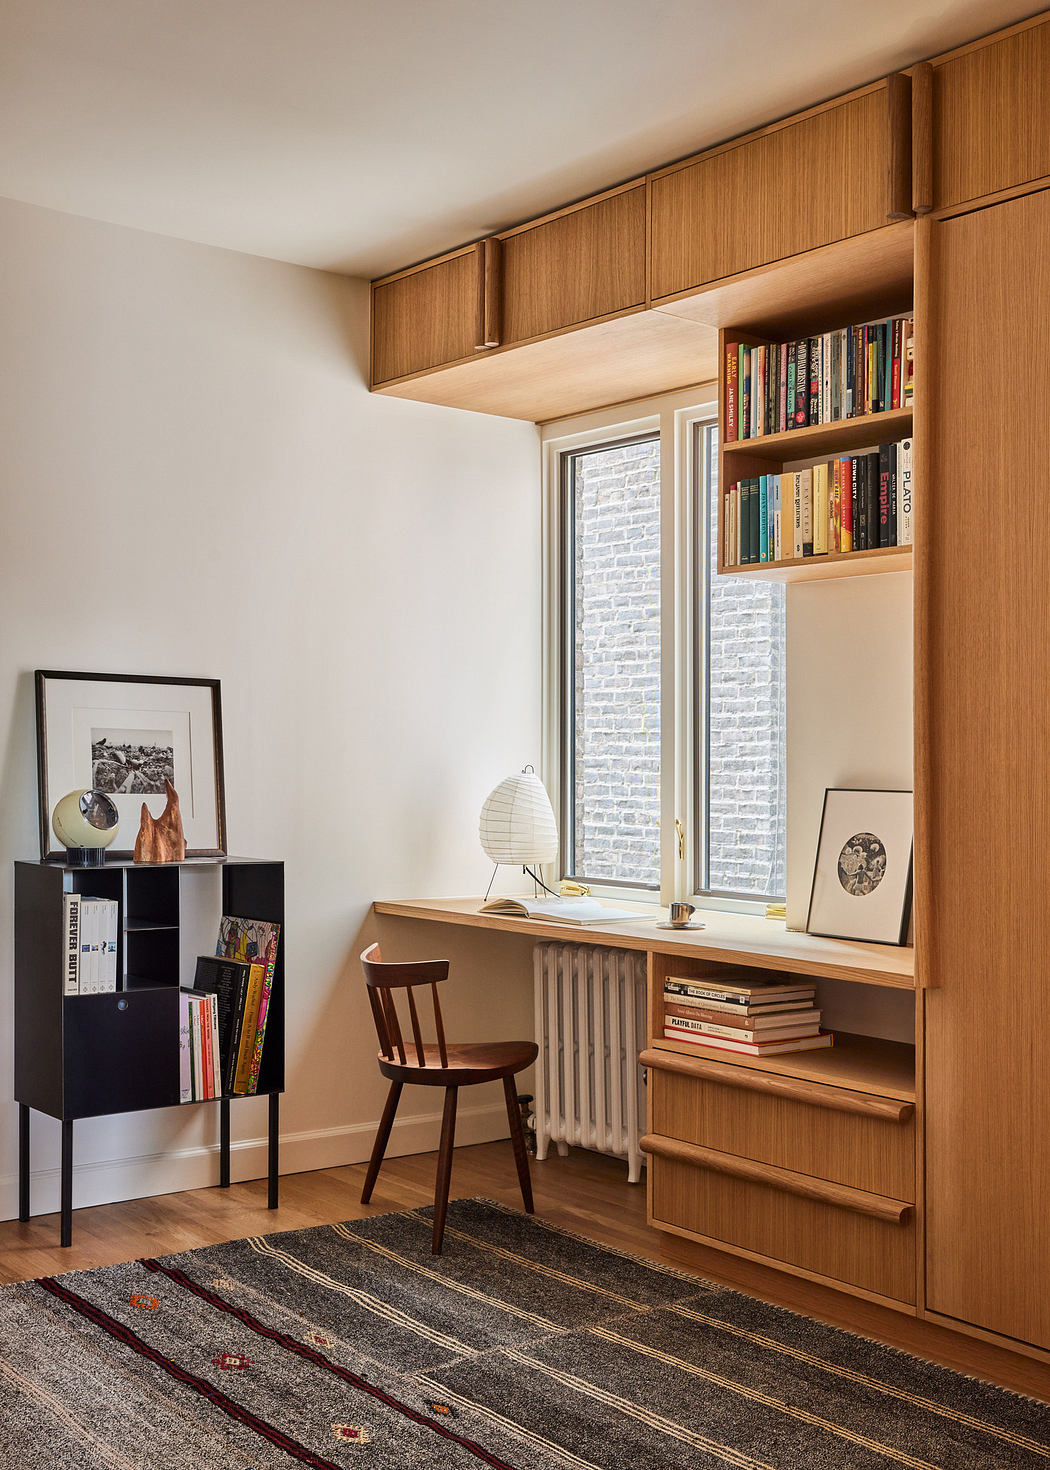 Cozy reading nook with built-in bookshelves and wooden desk by a